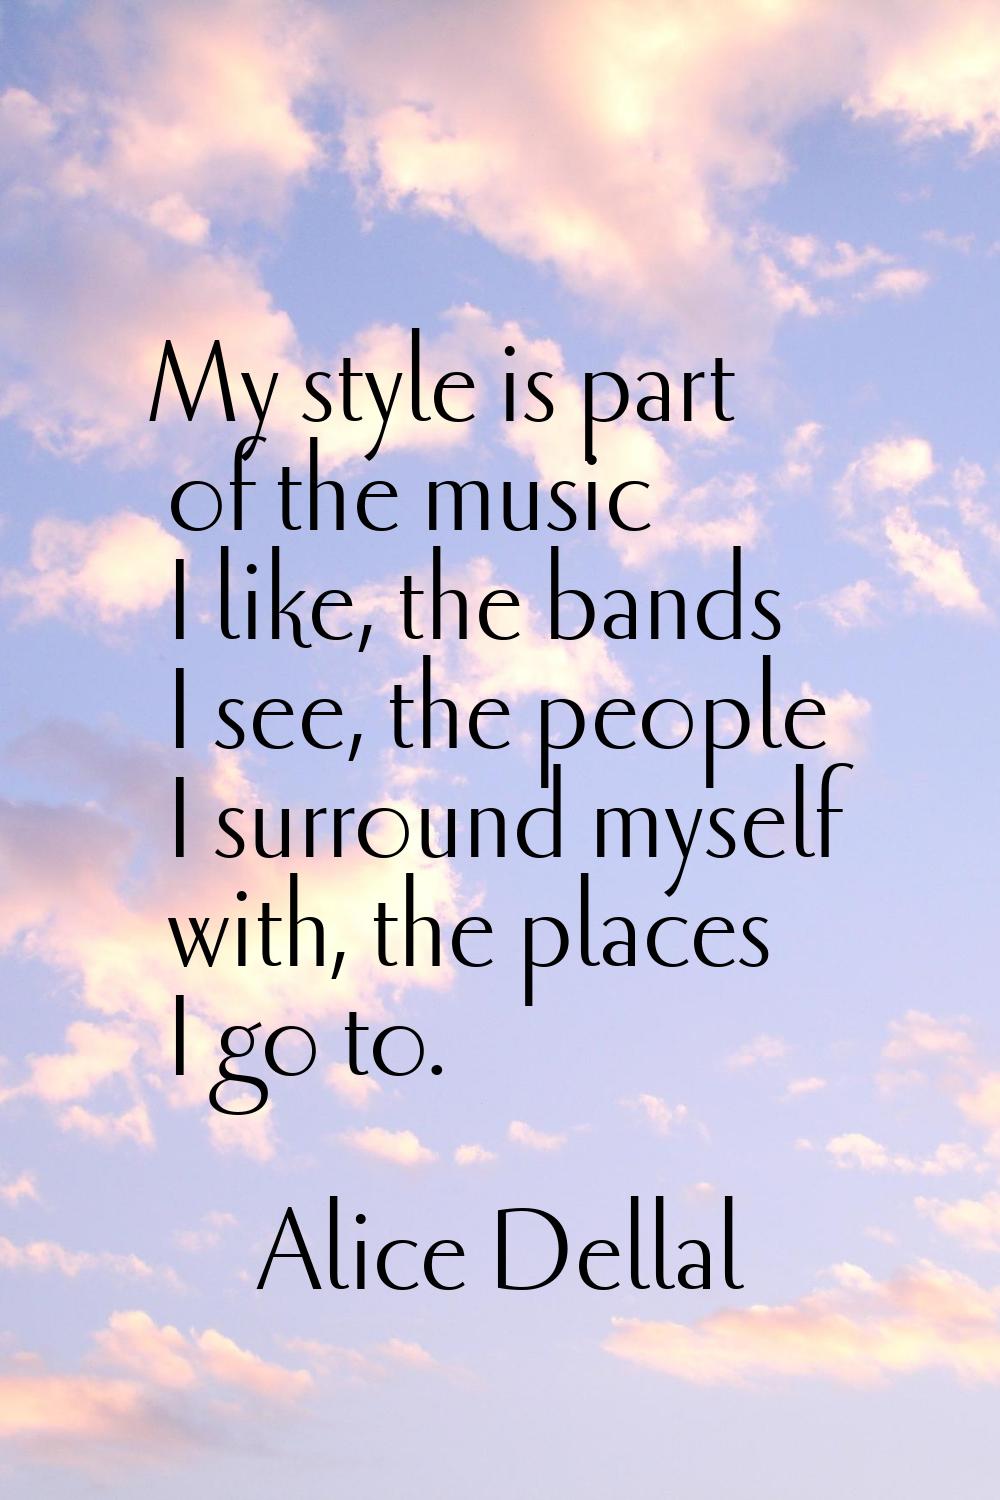 My style is part of the music I like, the bands I see, the people I surround myself with, the place